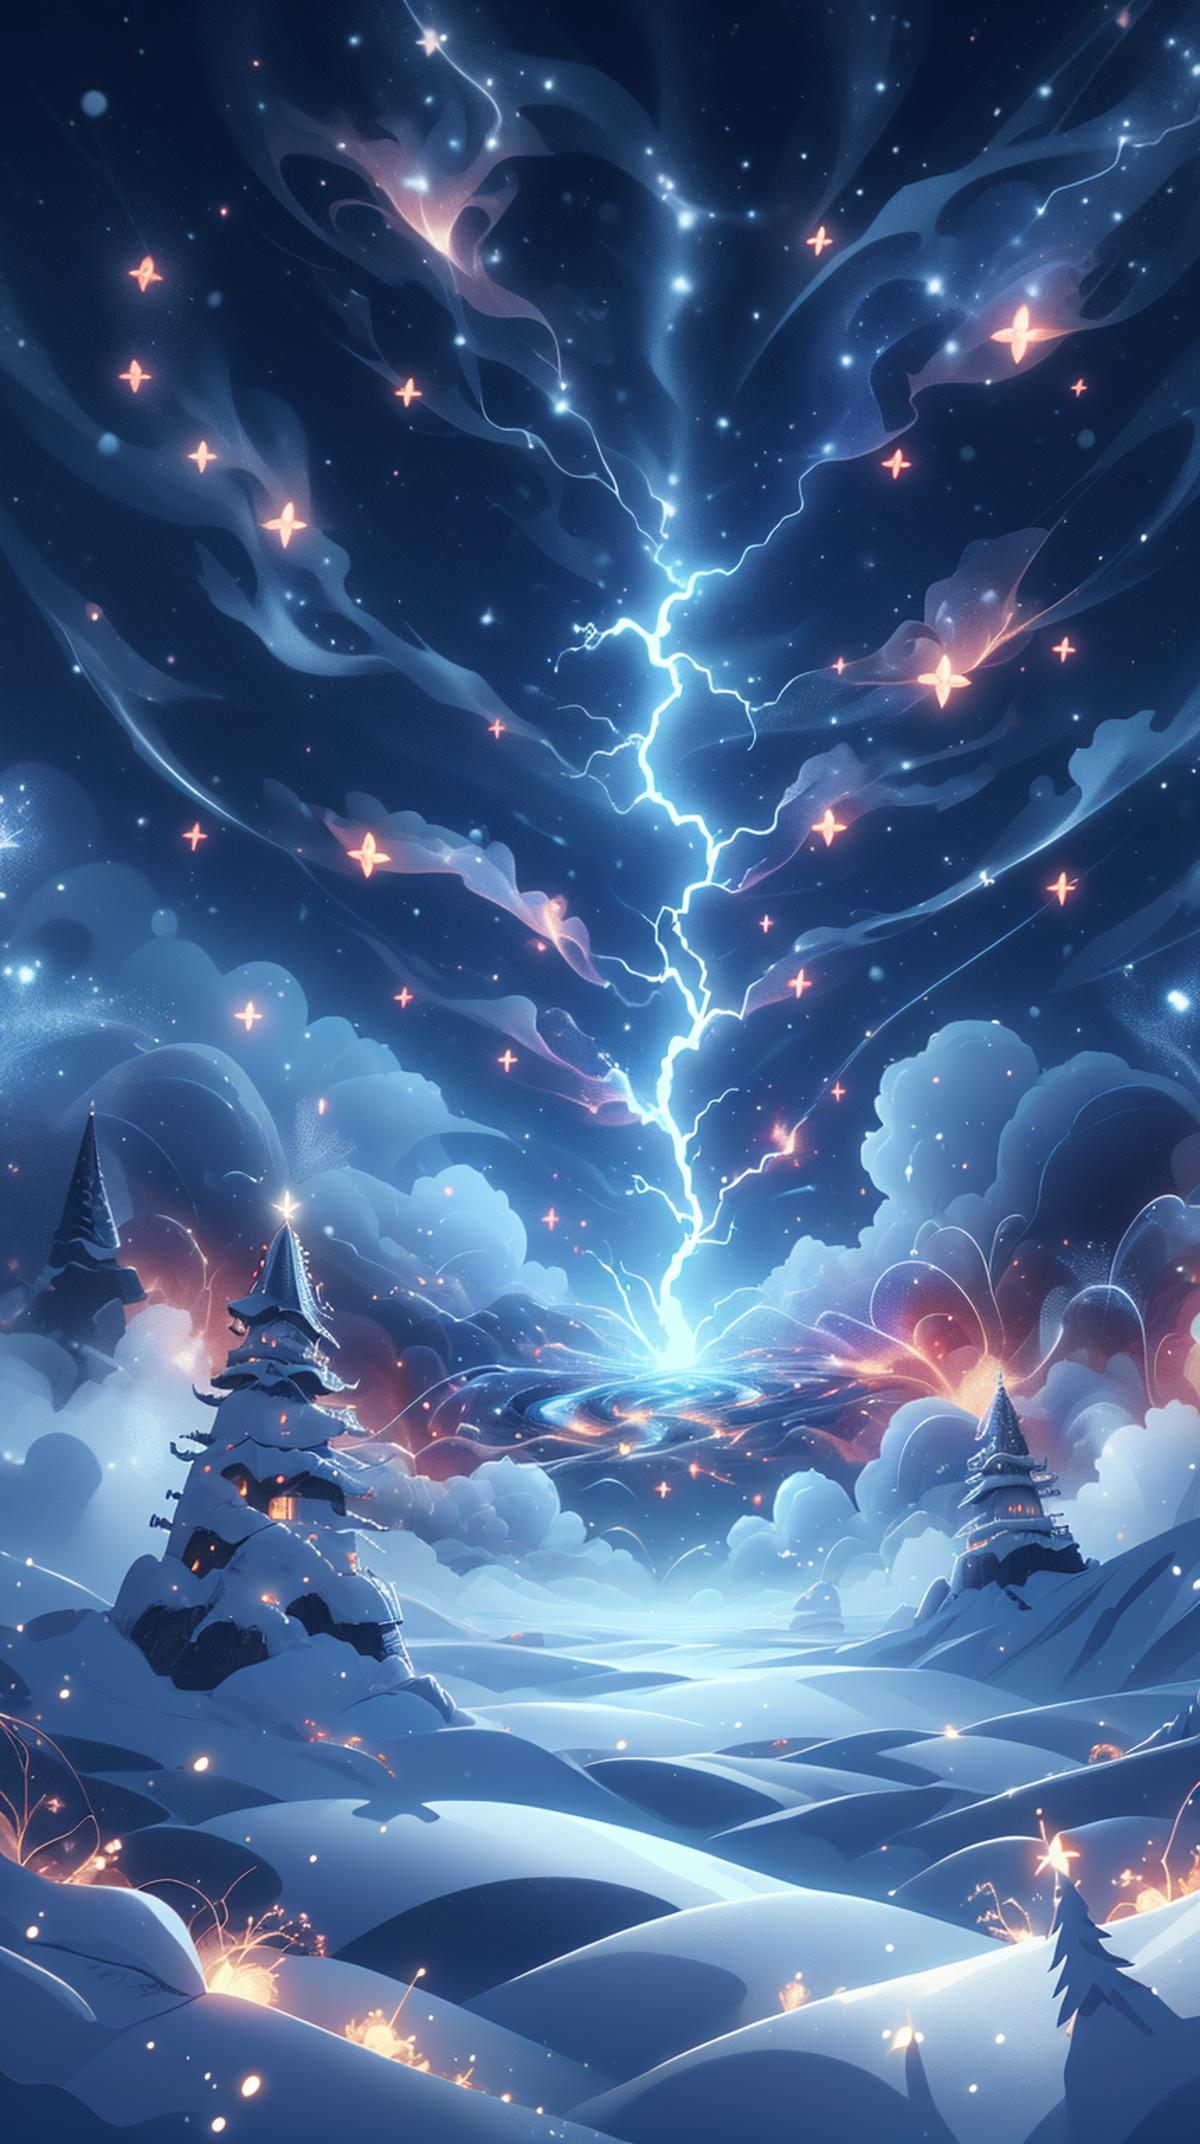 Colorful Christmas Lights in the Sky with Snow-Covered Trees